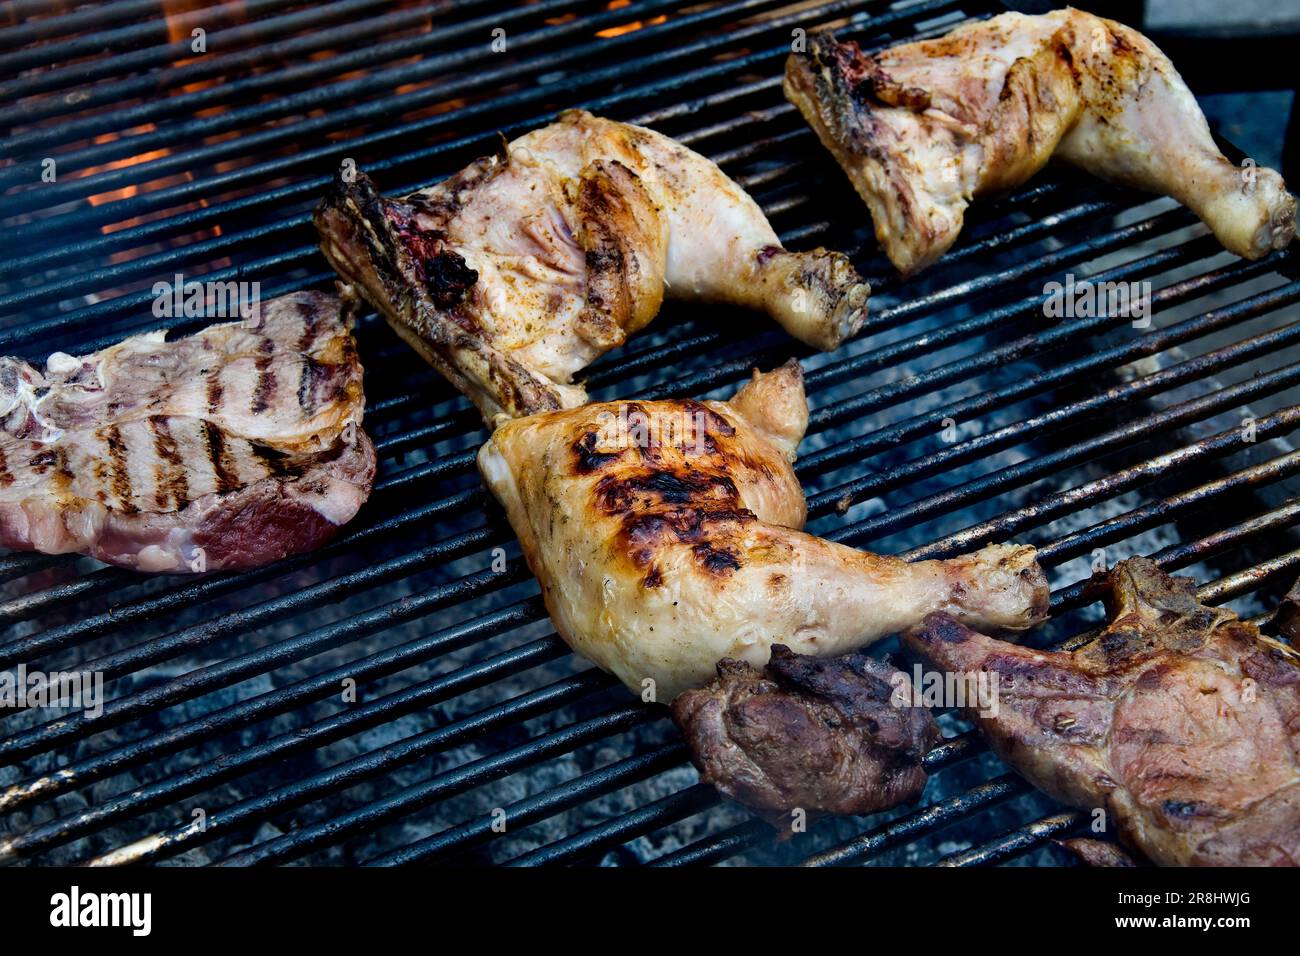 Barbeque Grill Stock Photo